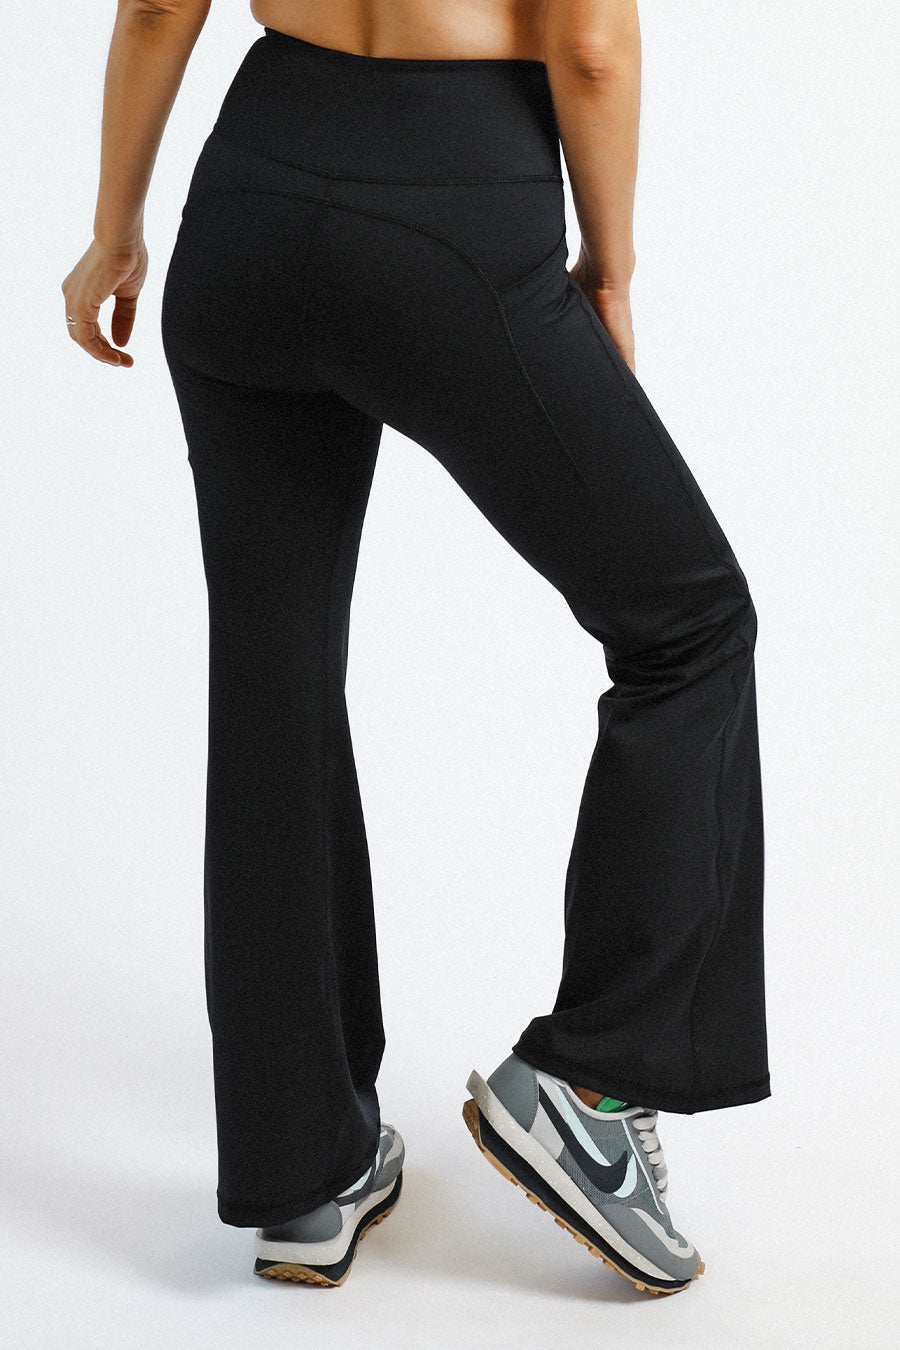 Petite Pocket Flare Full Length Tight - Black from Active Truth™
